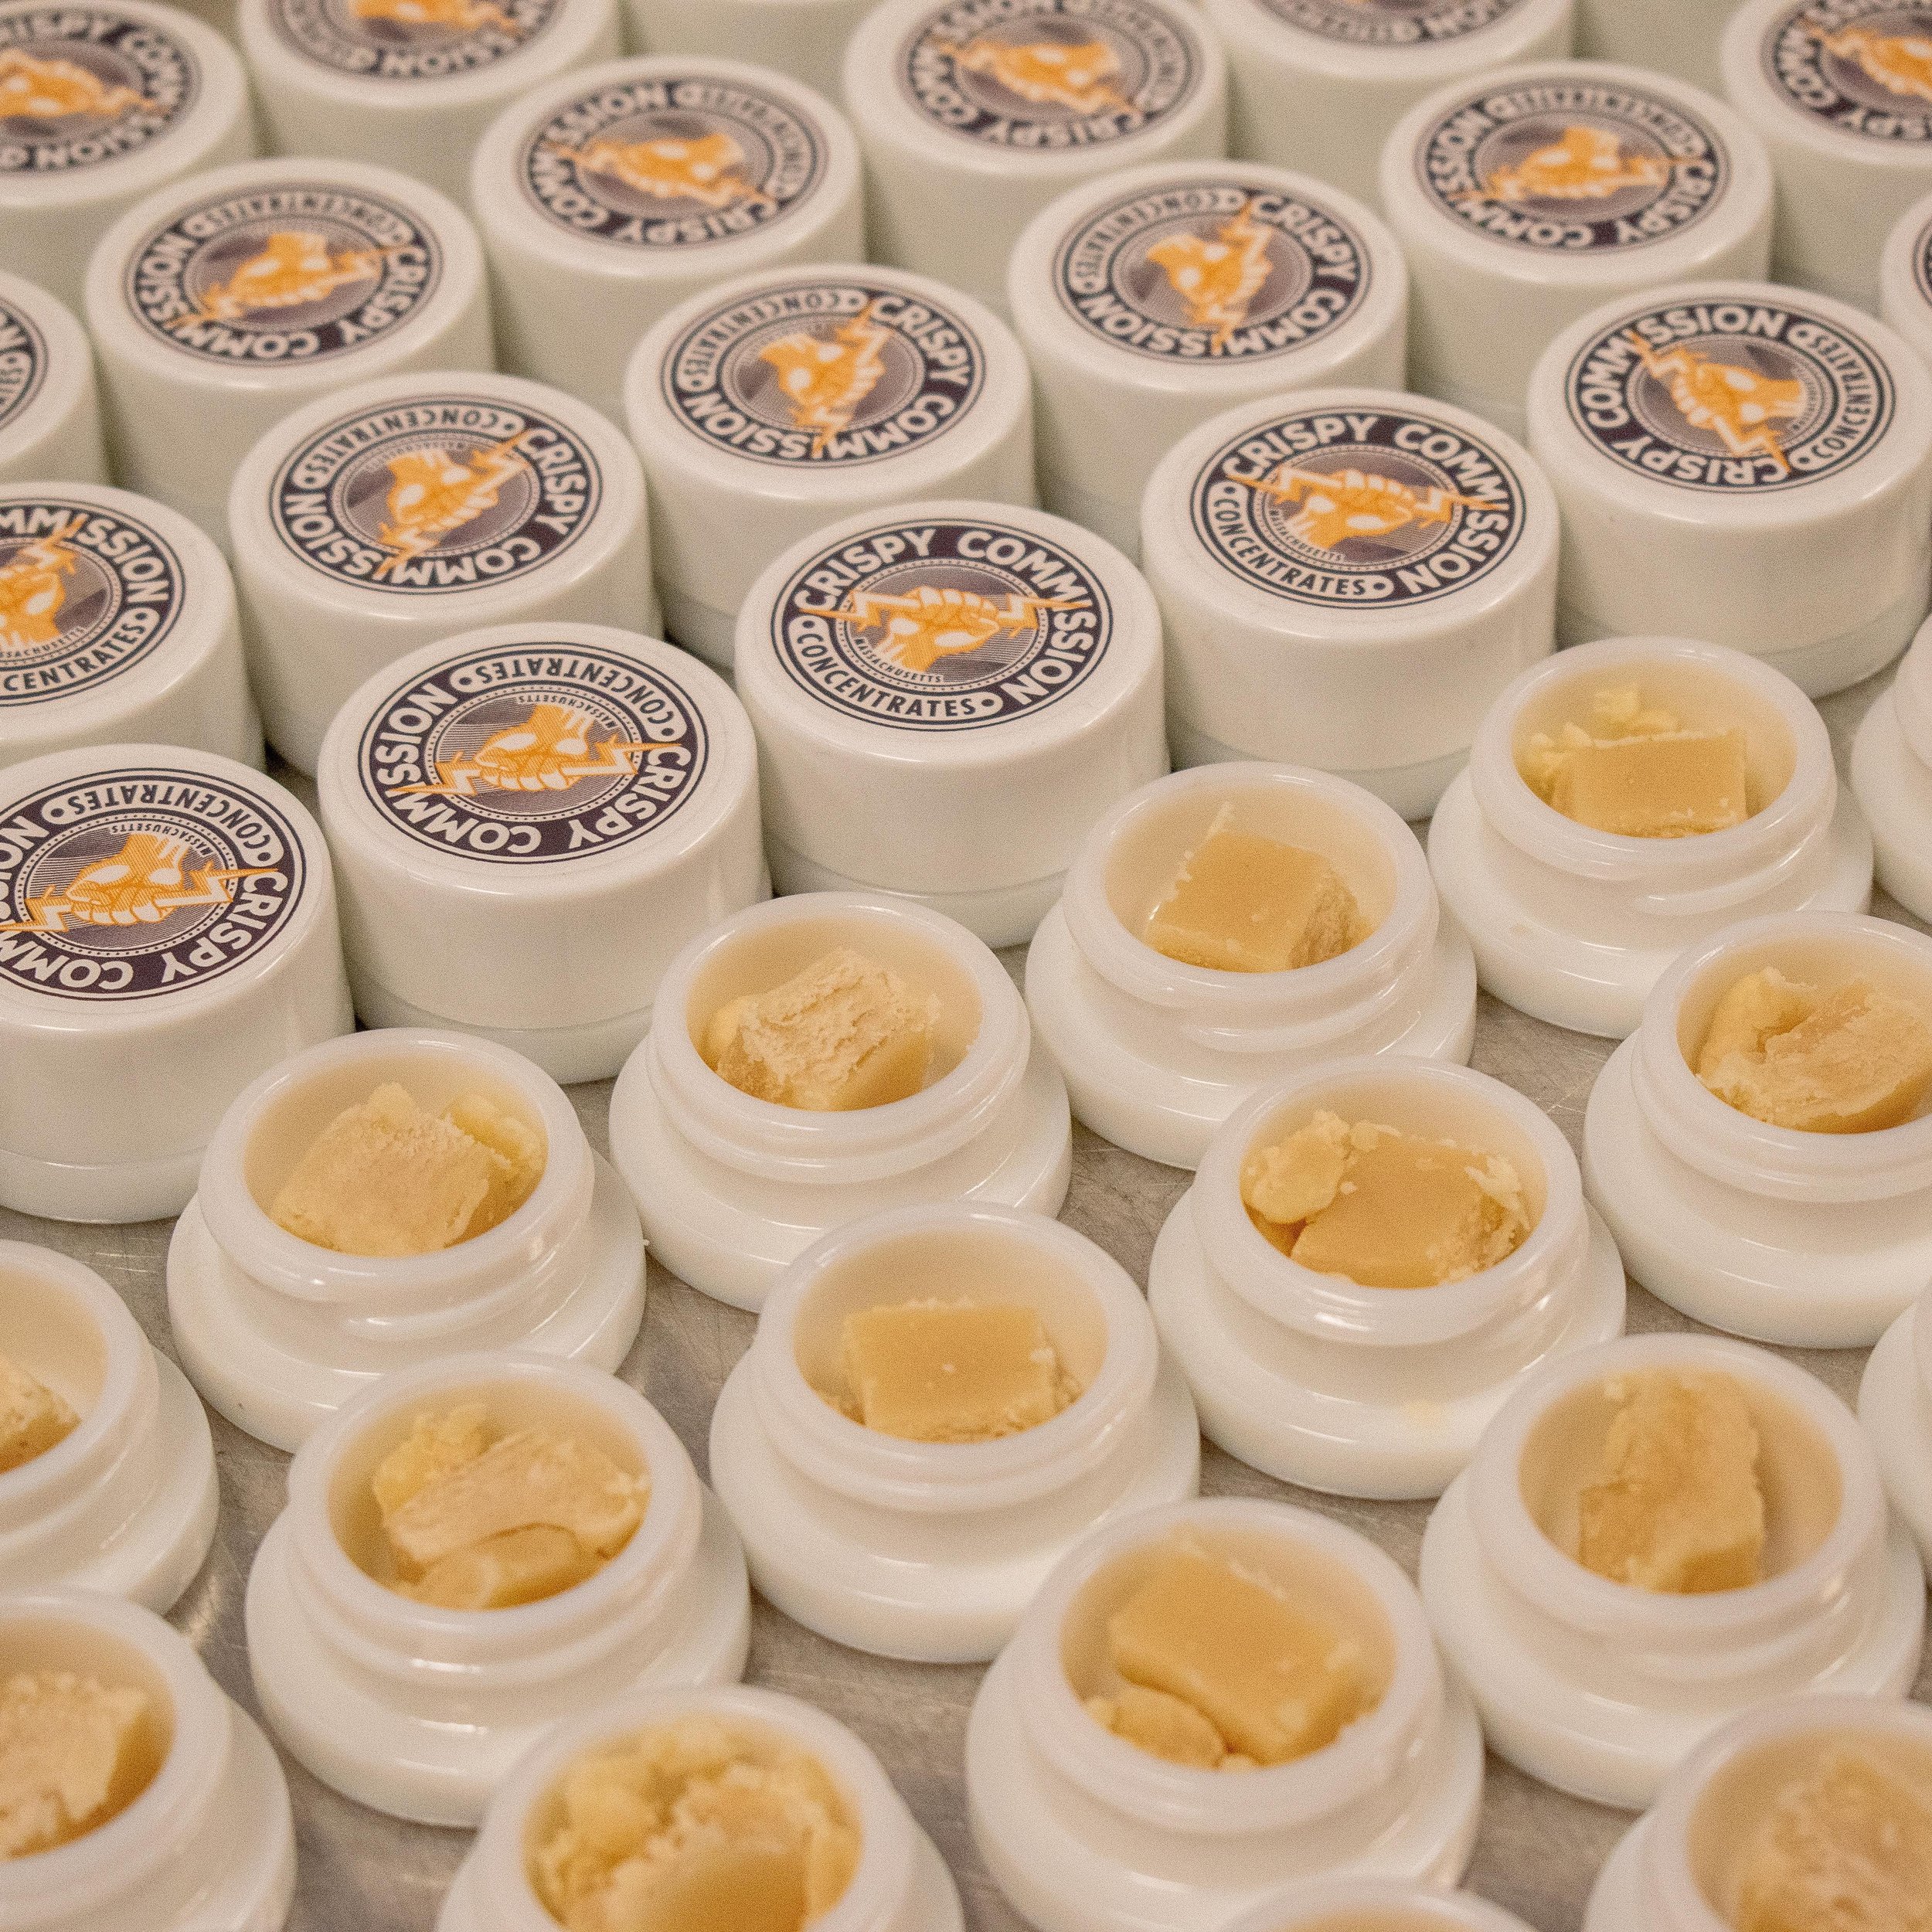 ✨ Packing up 3.5g baller jars with another Crispy Concentrate. 🔥 Have you experienced the magic of 3.5g yet? ✌️